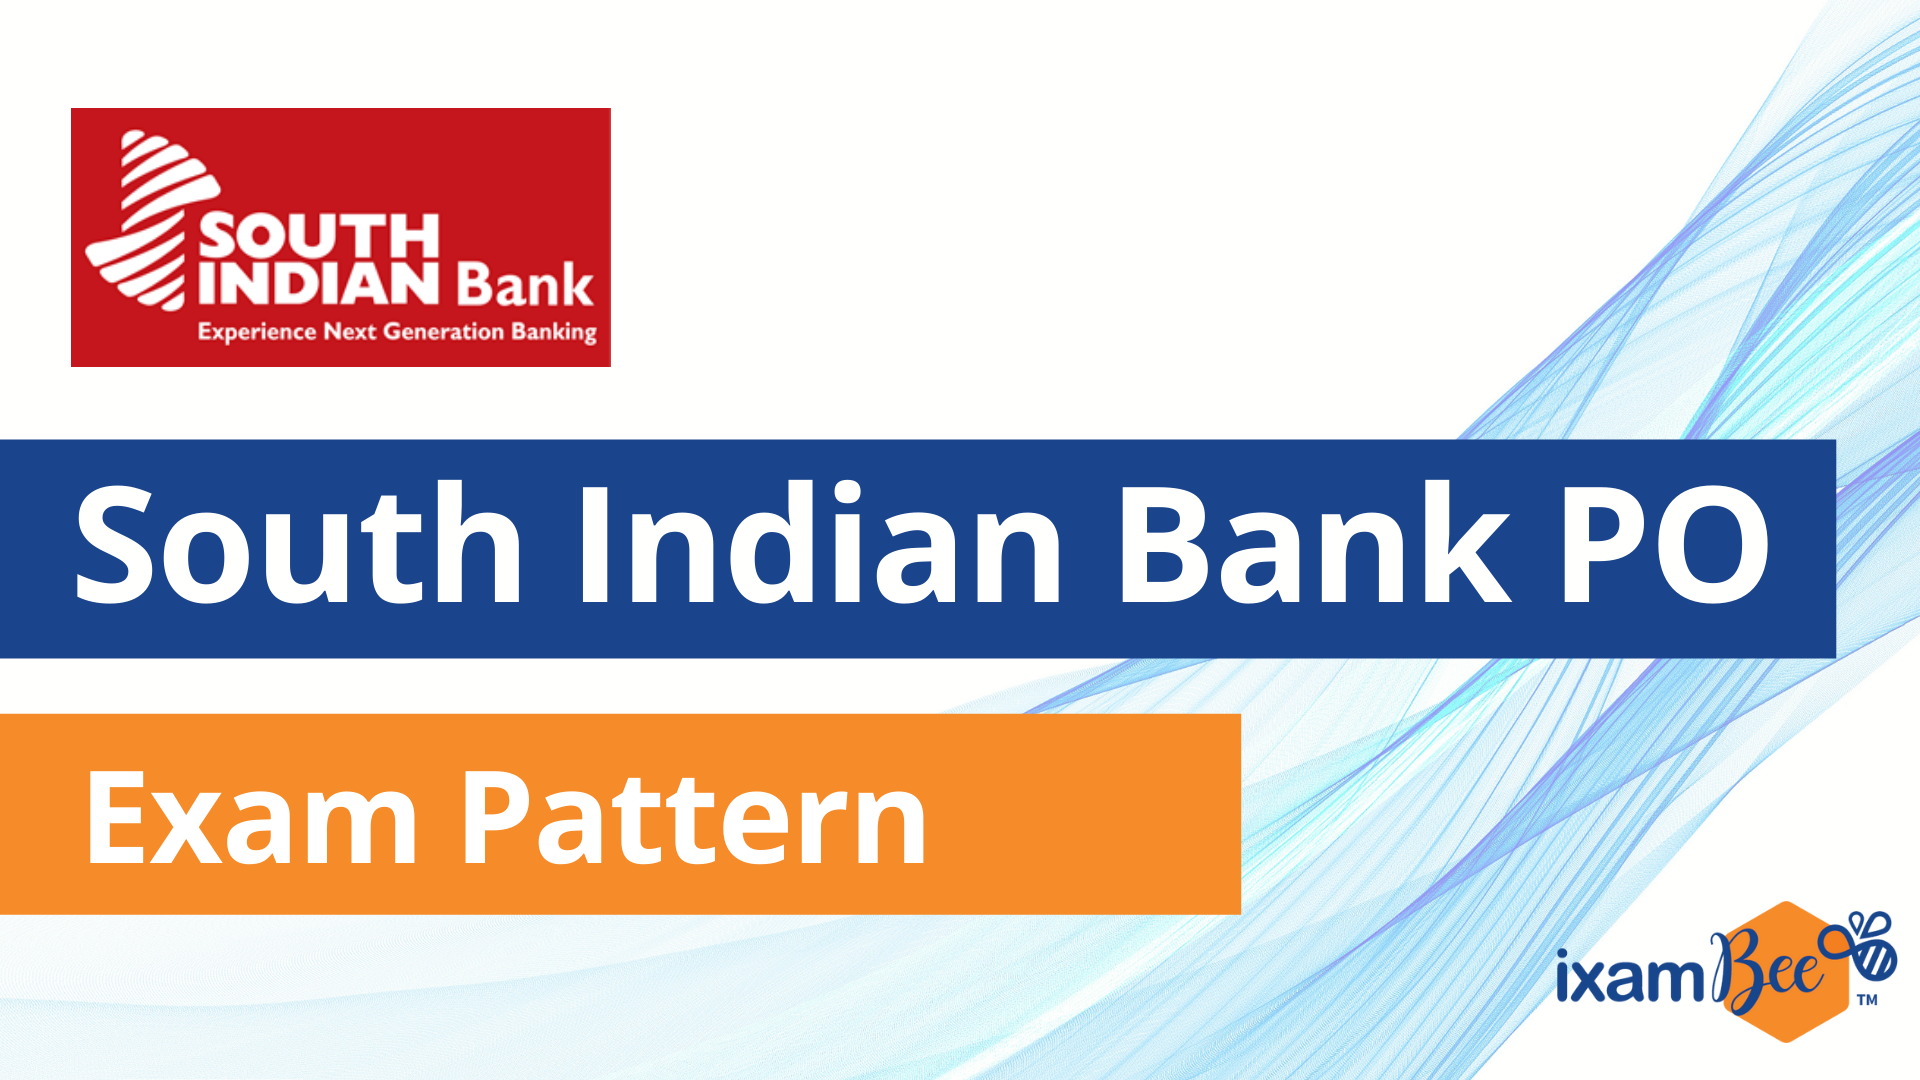 South Indian Bank PO Exam Pattern